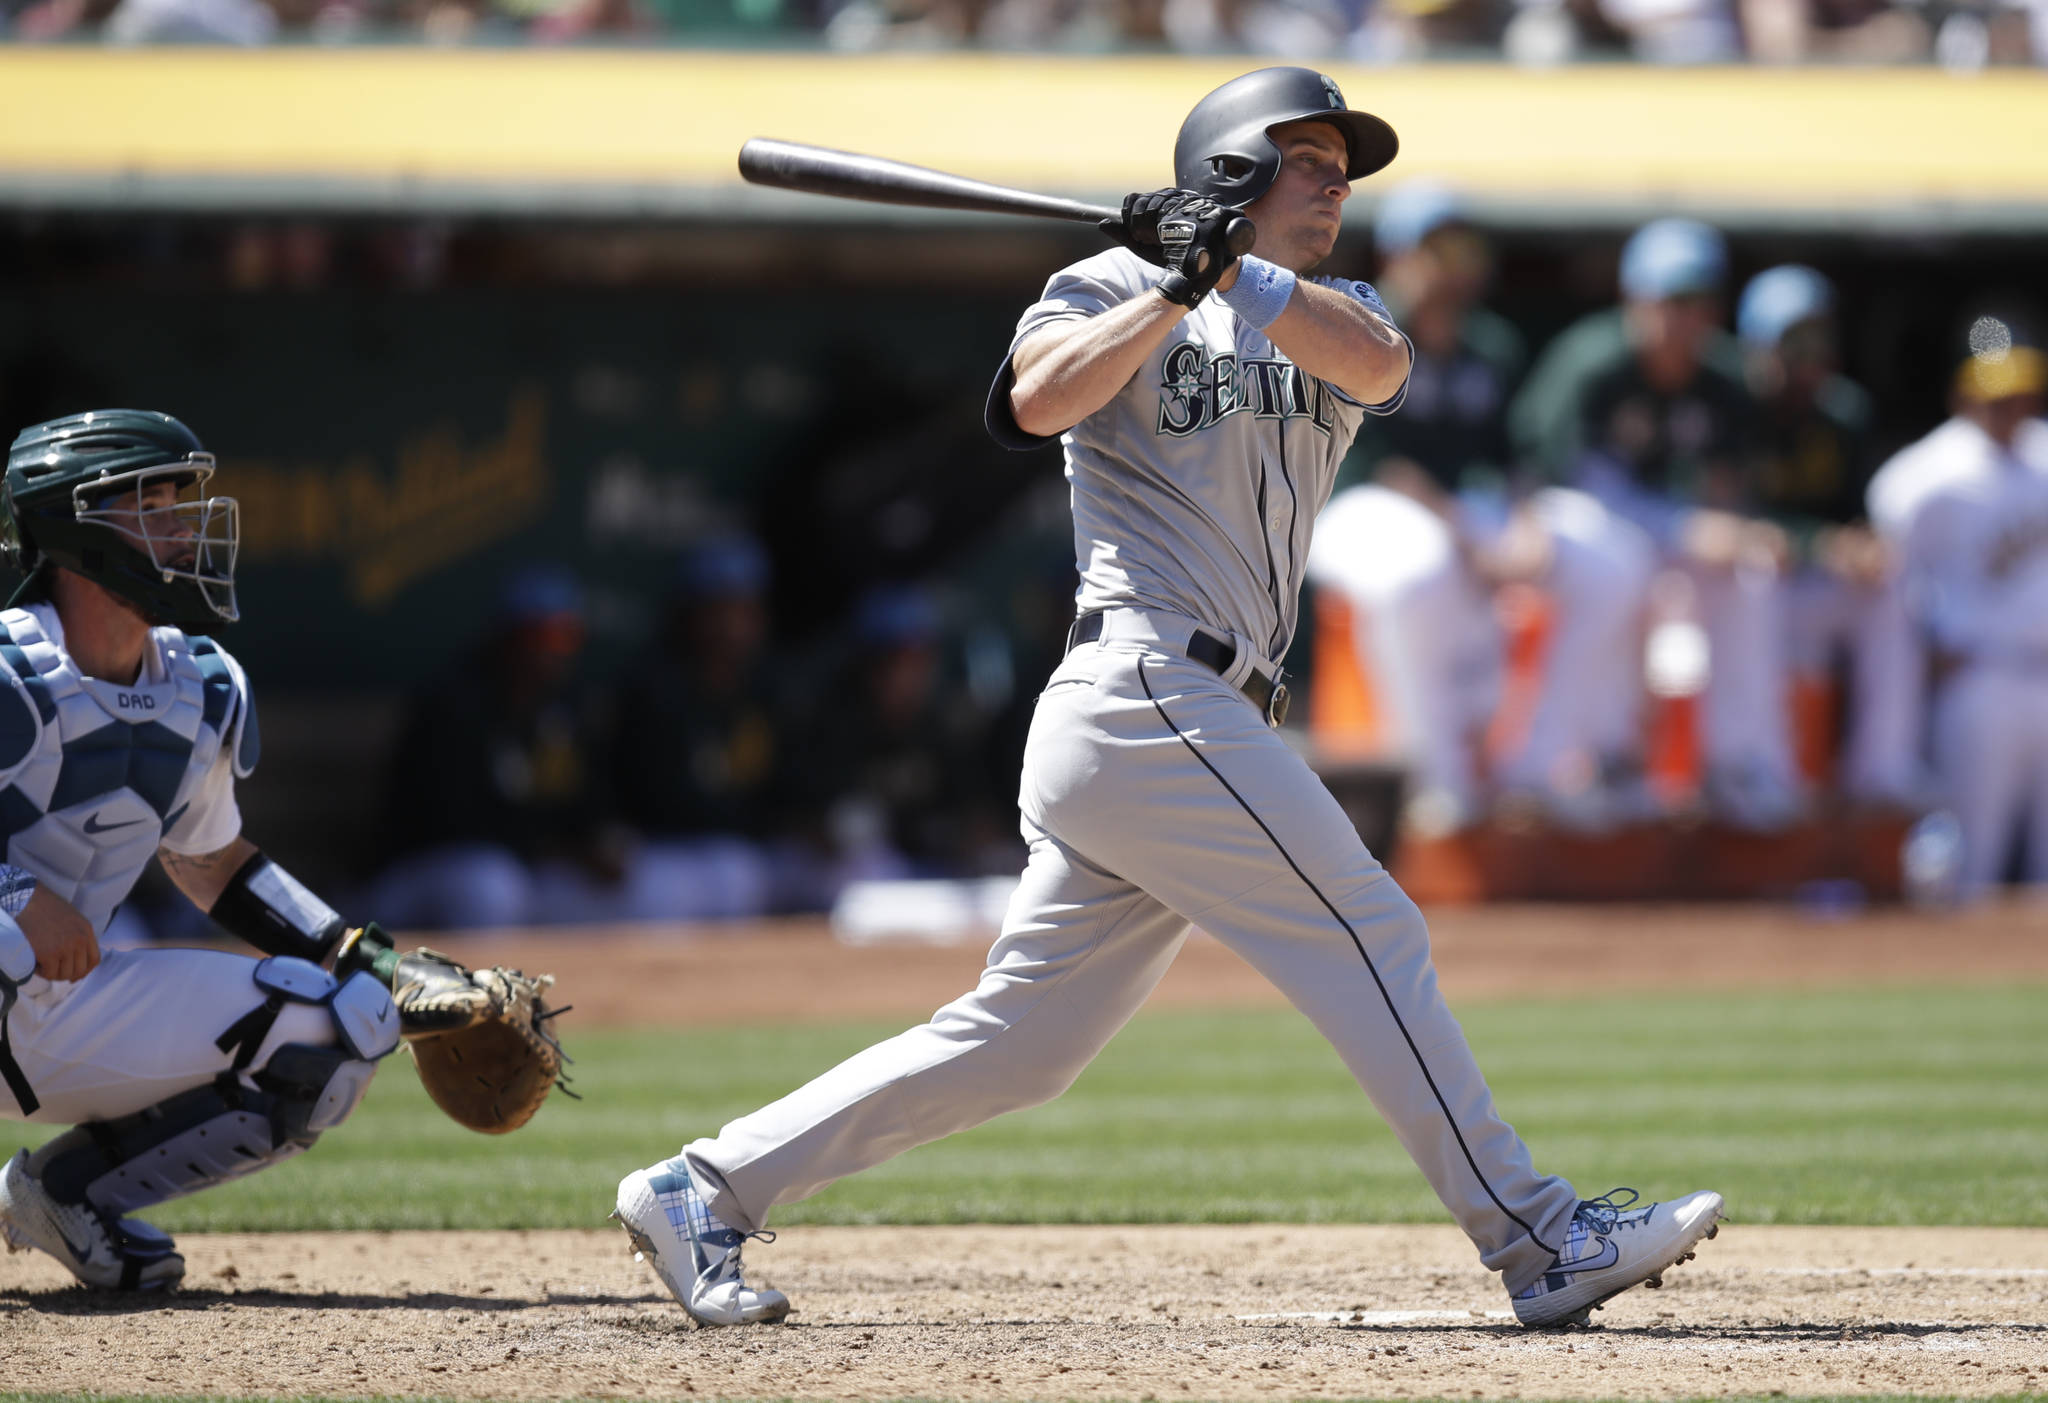 Seattle’s Kyle Seager watches the two-run double he hit off Oakland’s Lou Trivino in the eighth inning of Sunday’s game in Oakland, California. (AP Photo/Ben Margot)